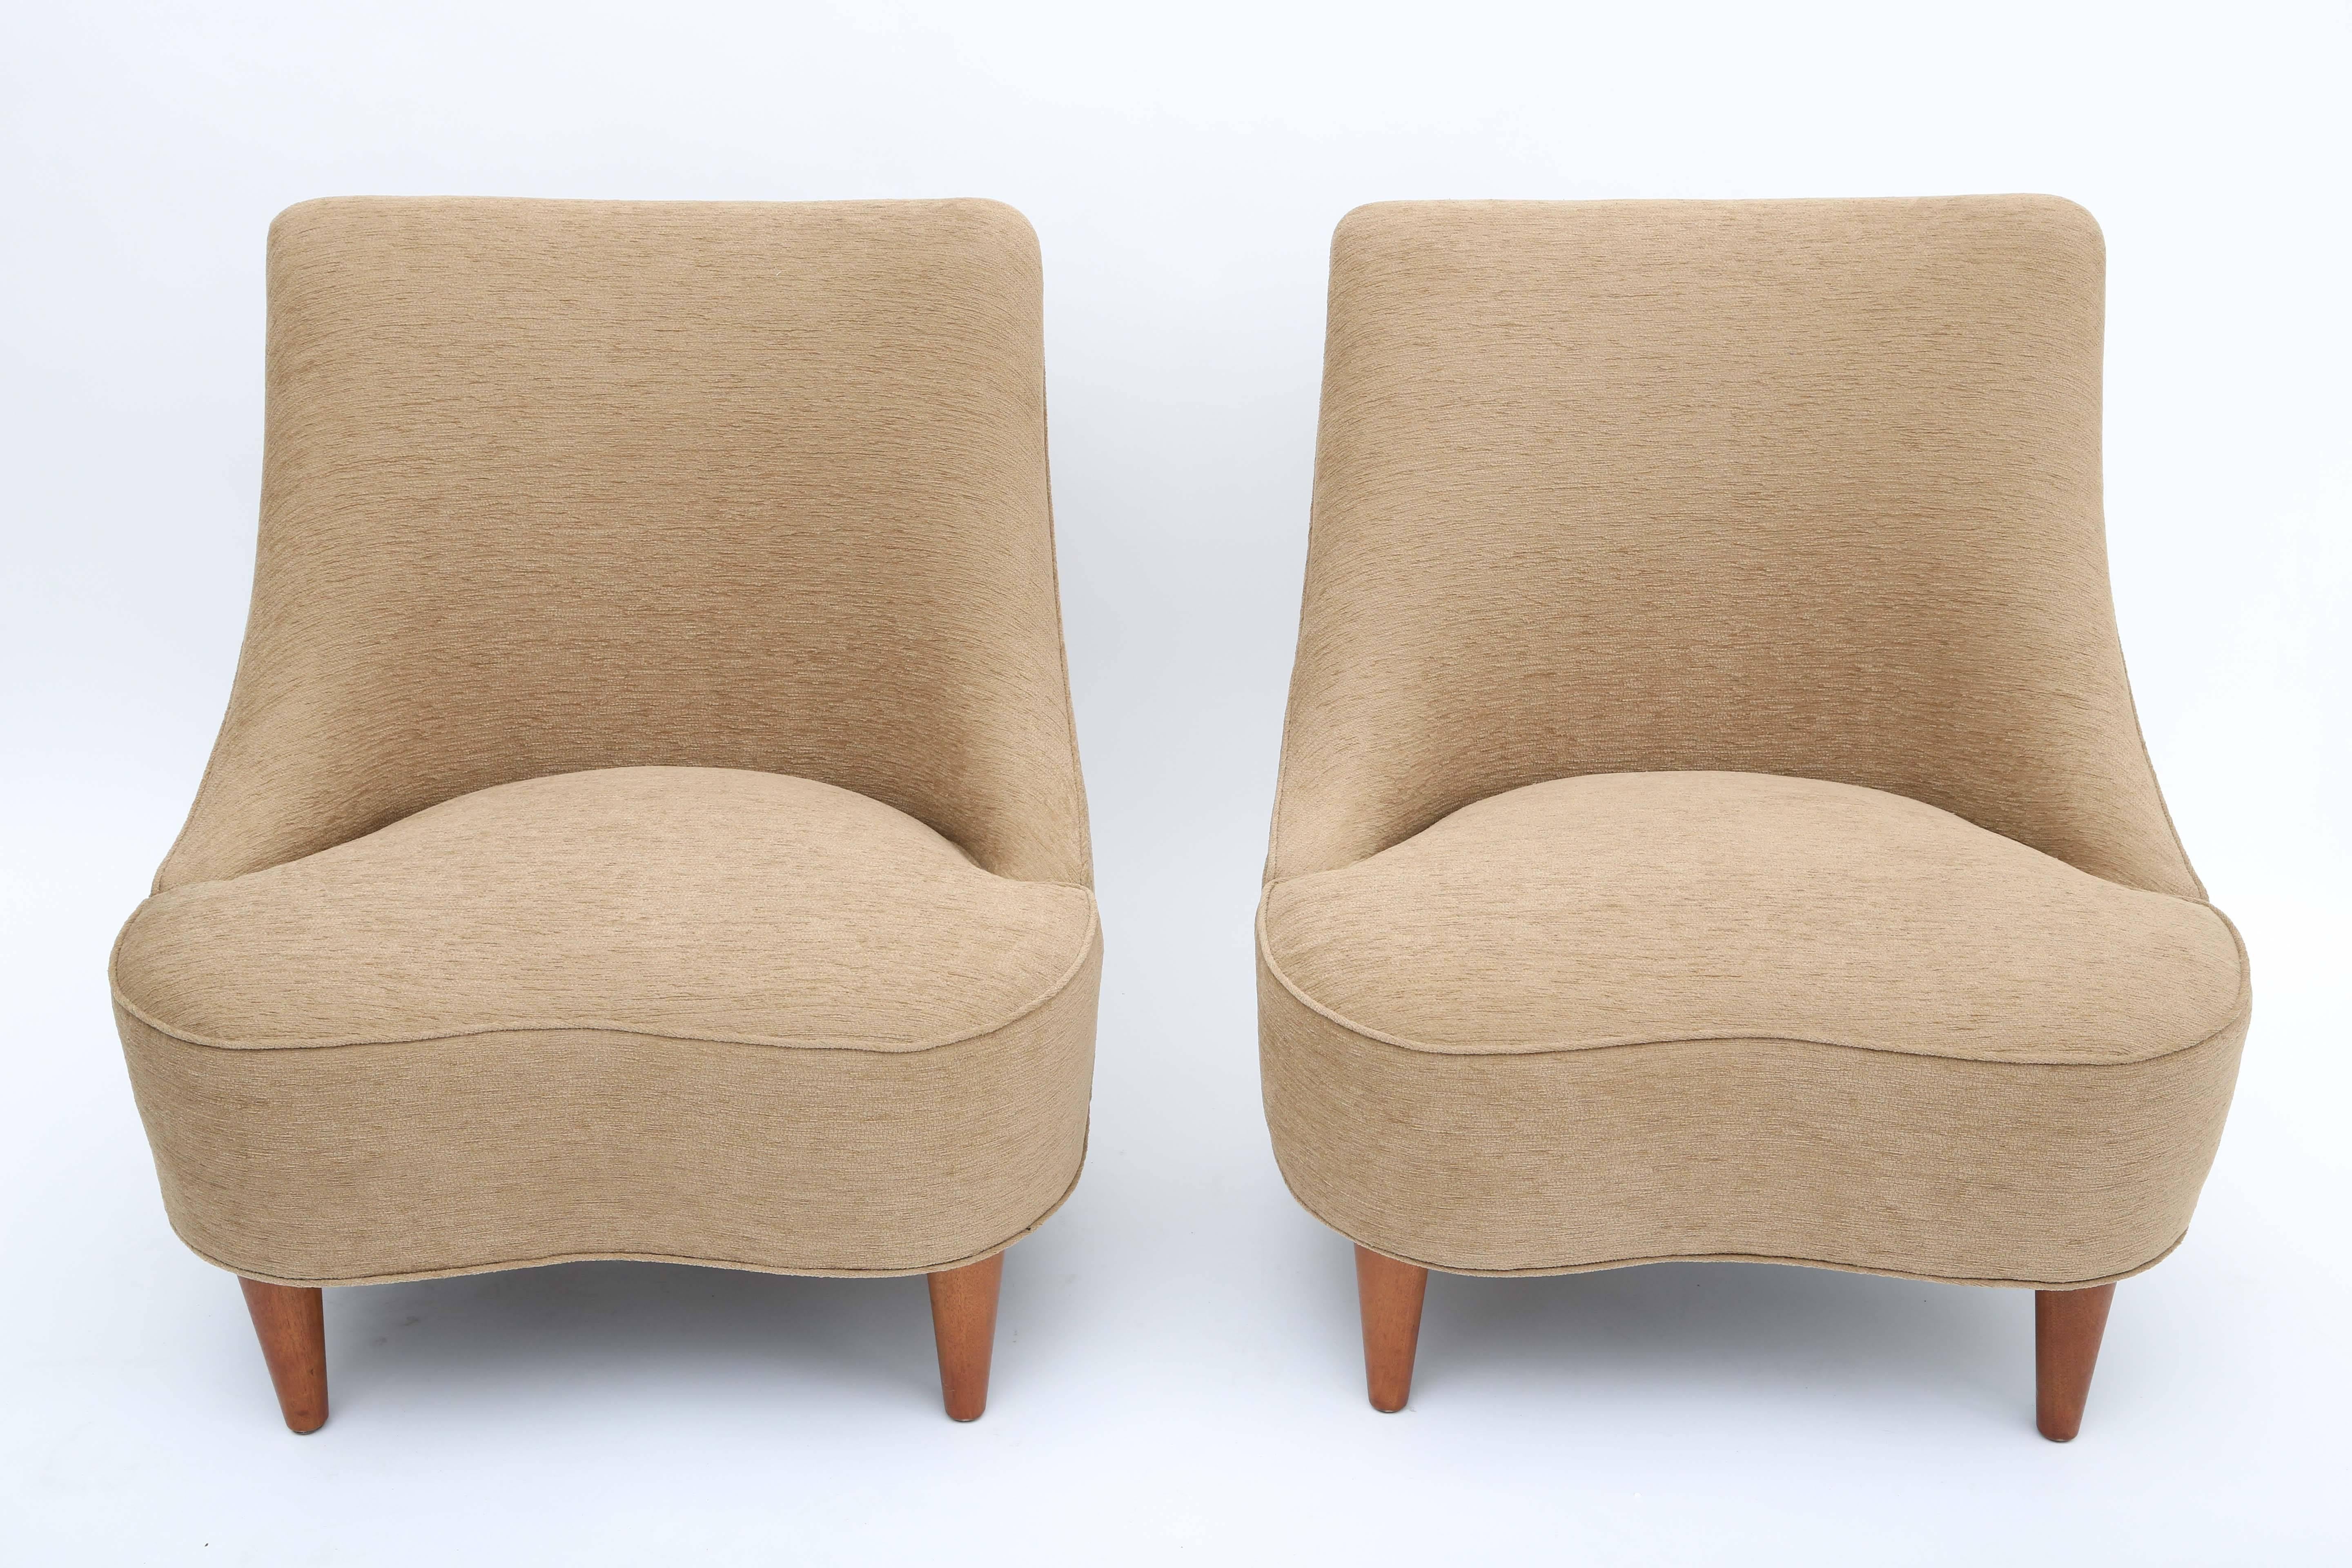 A wonderful matched pair of tear drop lounges
model #5106.
Professionally re-upholstered.